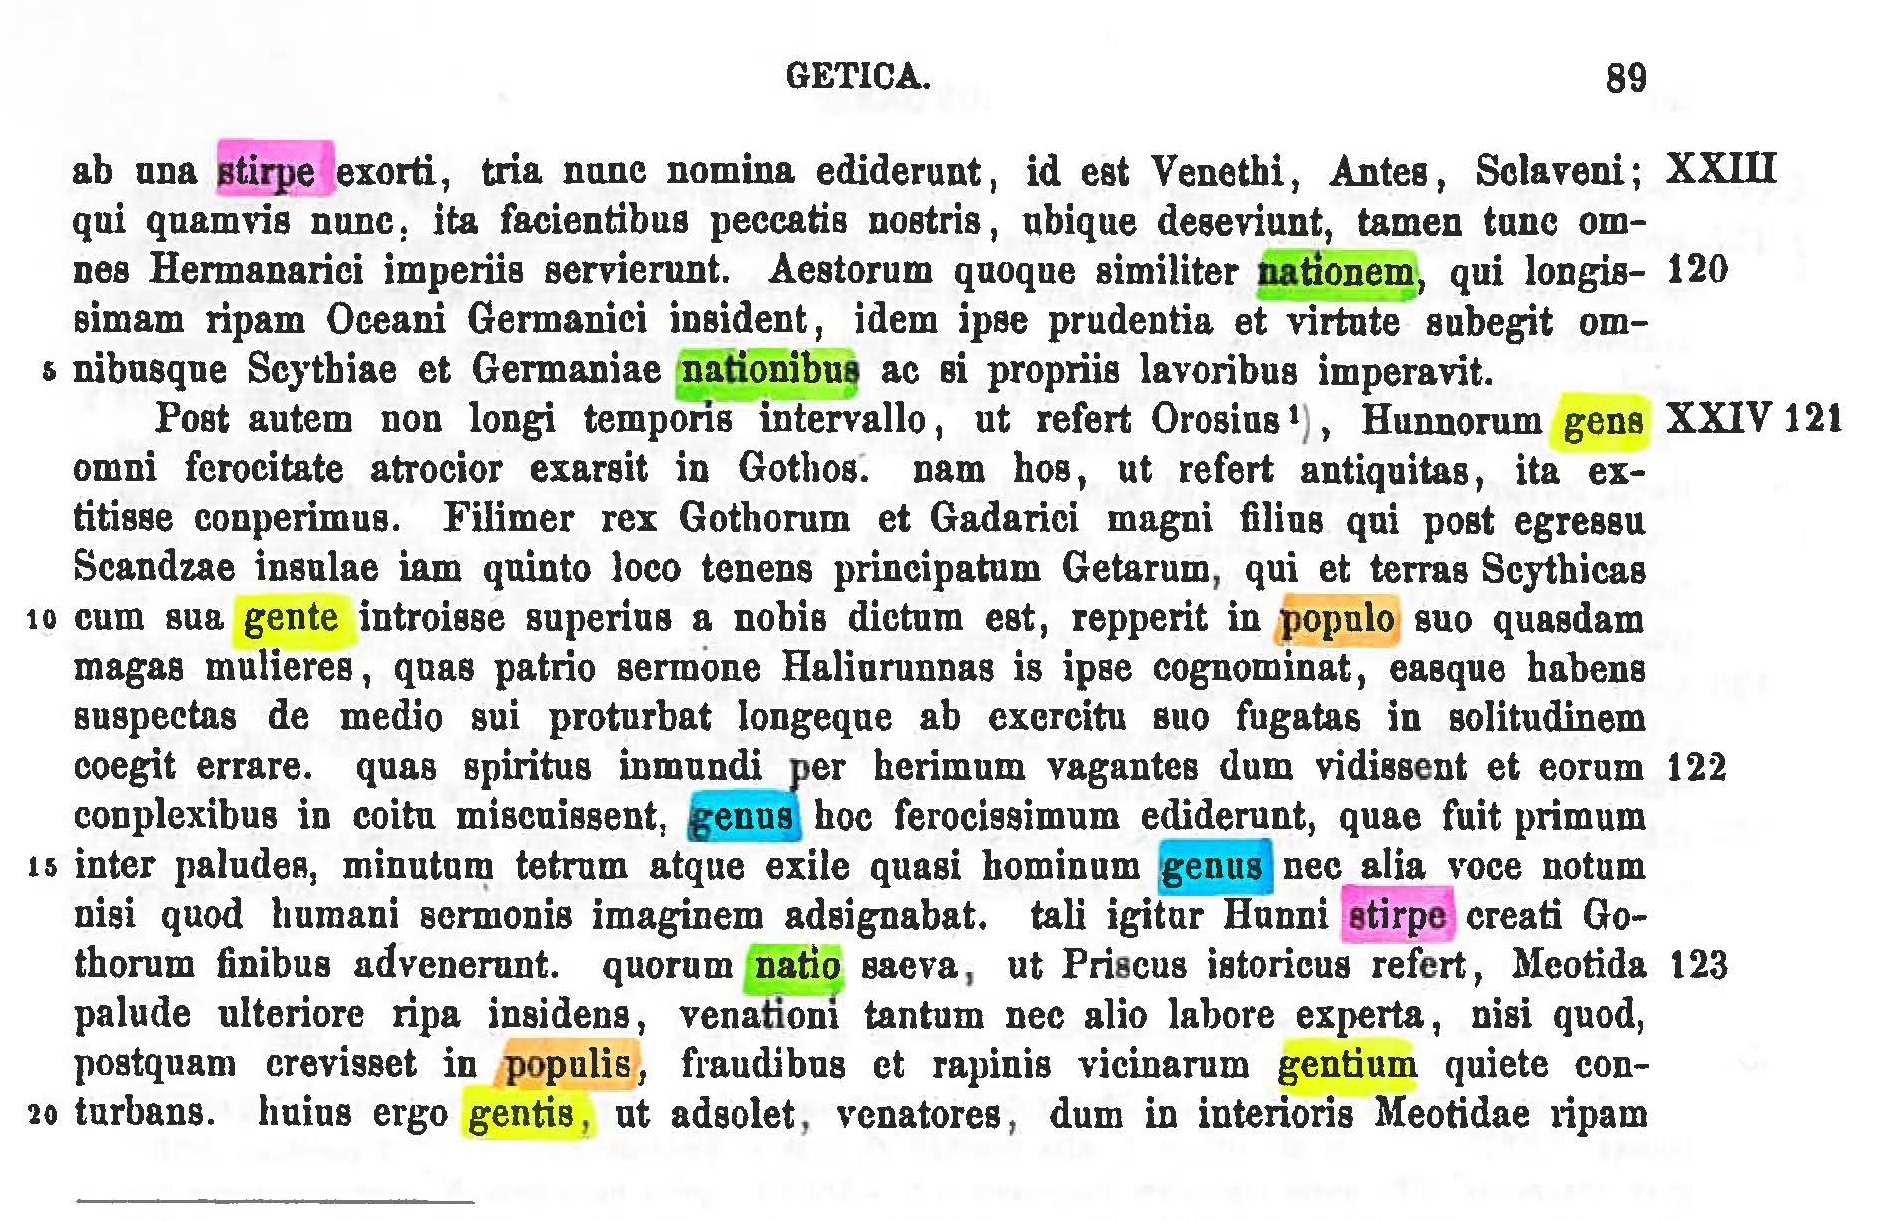 Rethinking Jordanes' Getica – A case study on use of terminology